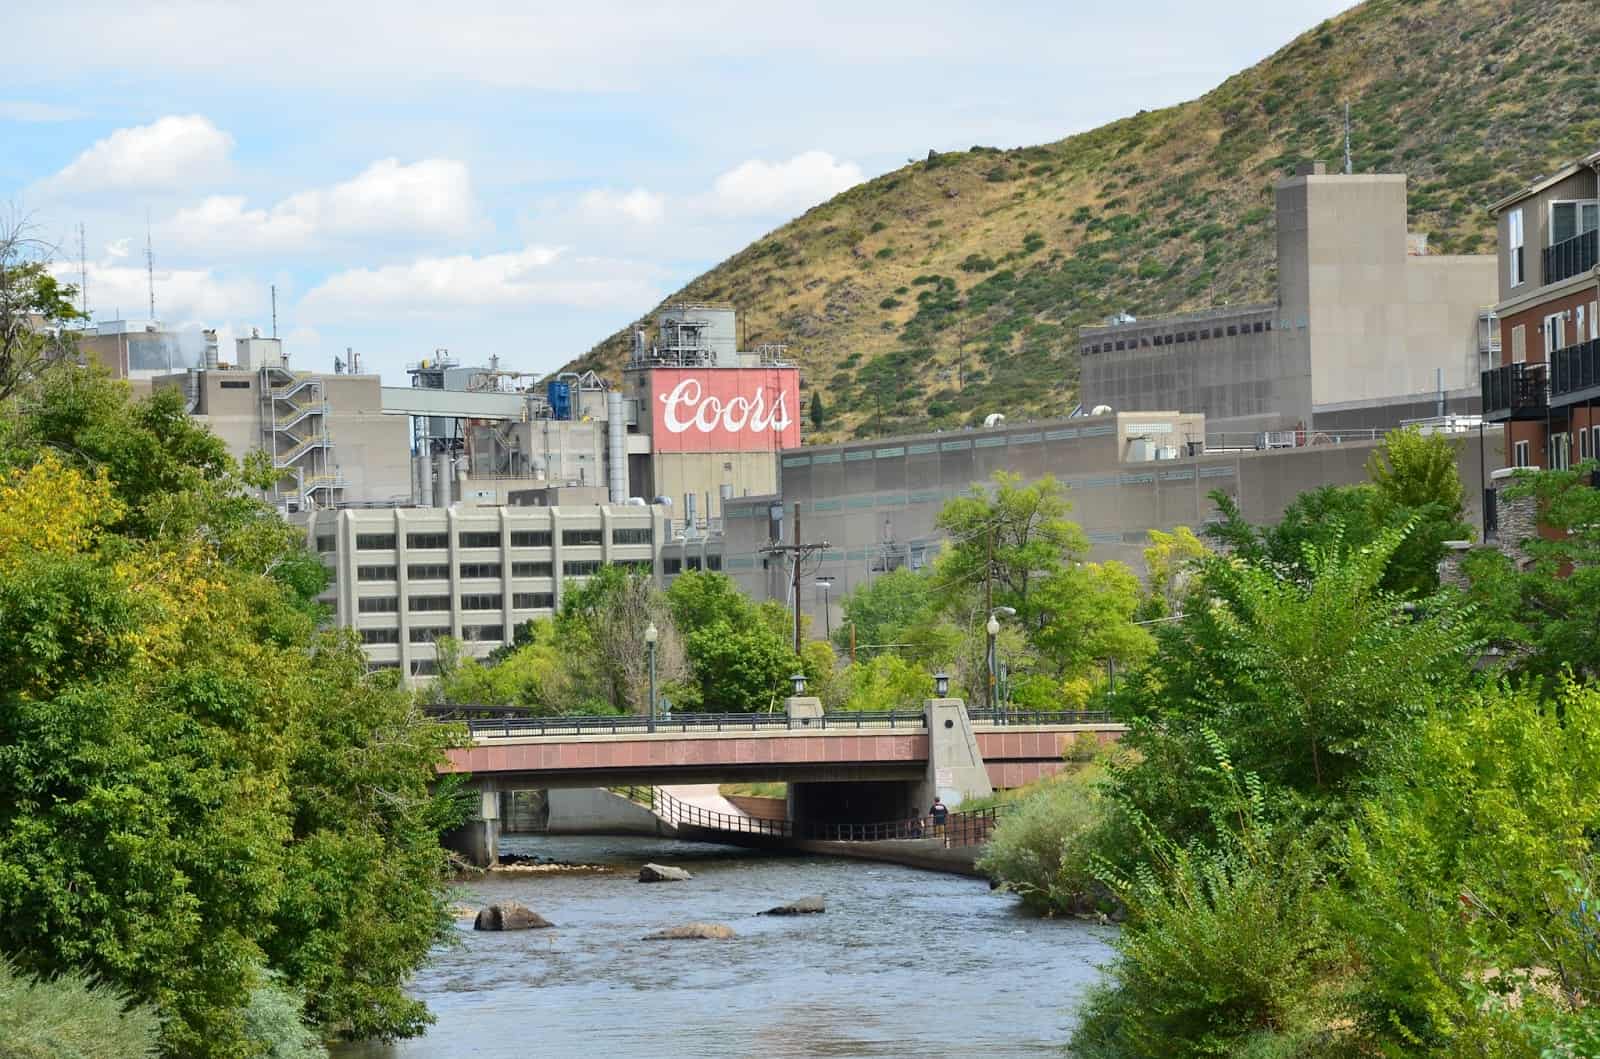 Coors brewery in Golden, Colorado